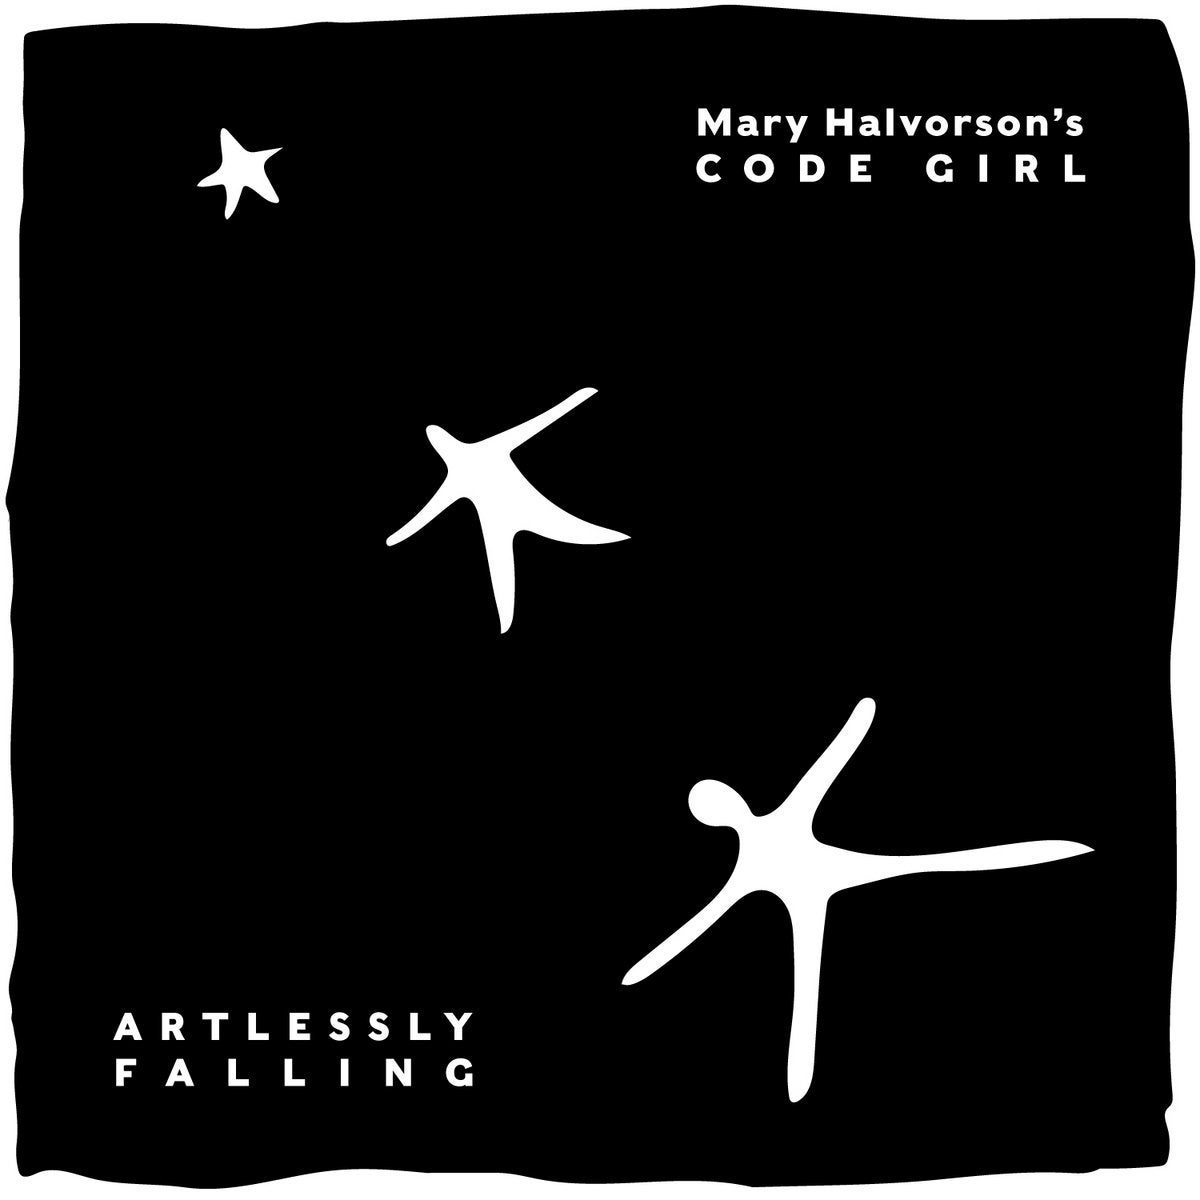 Cover of Artlessly Falling.